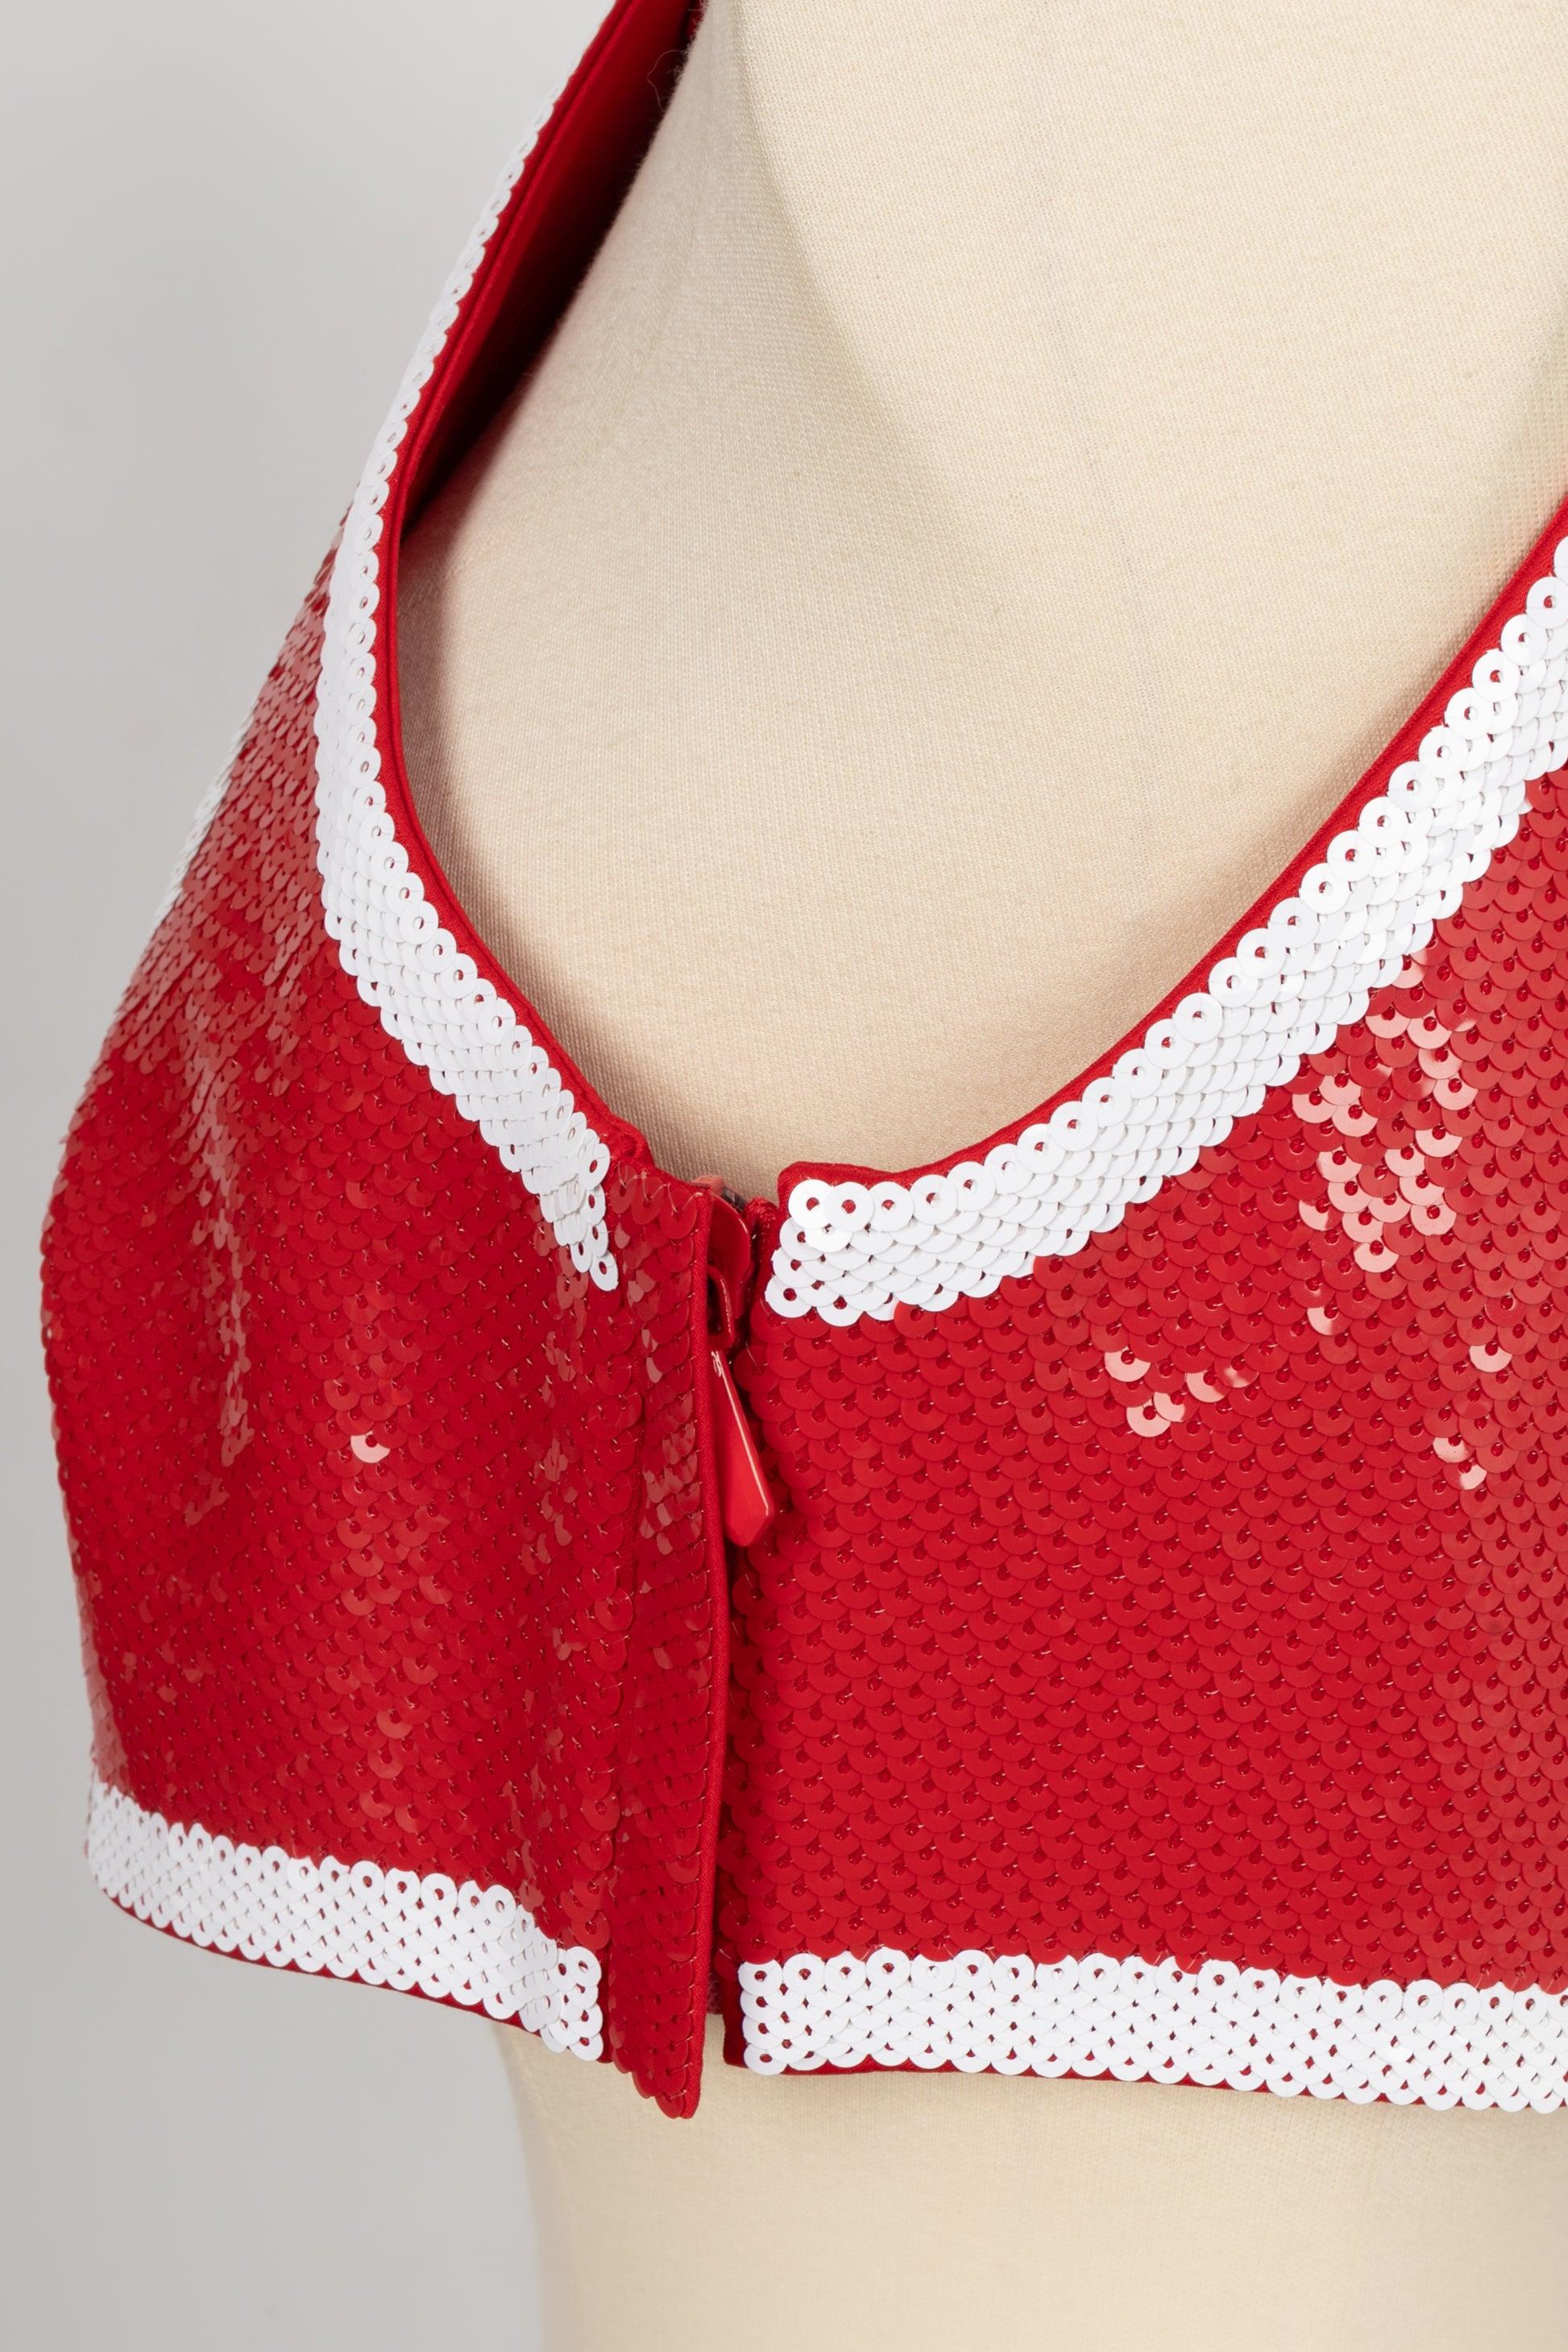 Moschino Red and White Sequinned Top Spring, 2016 For Sale 3